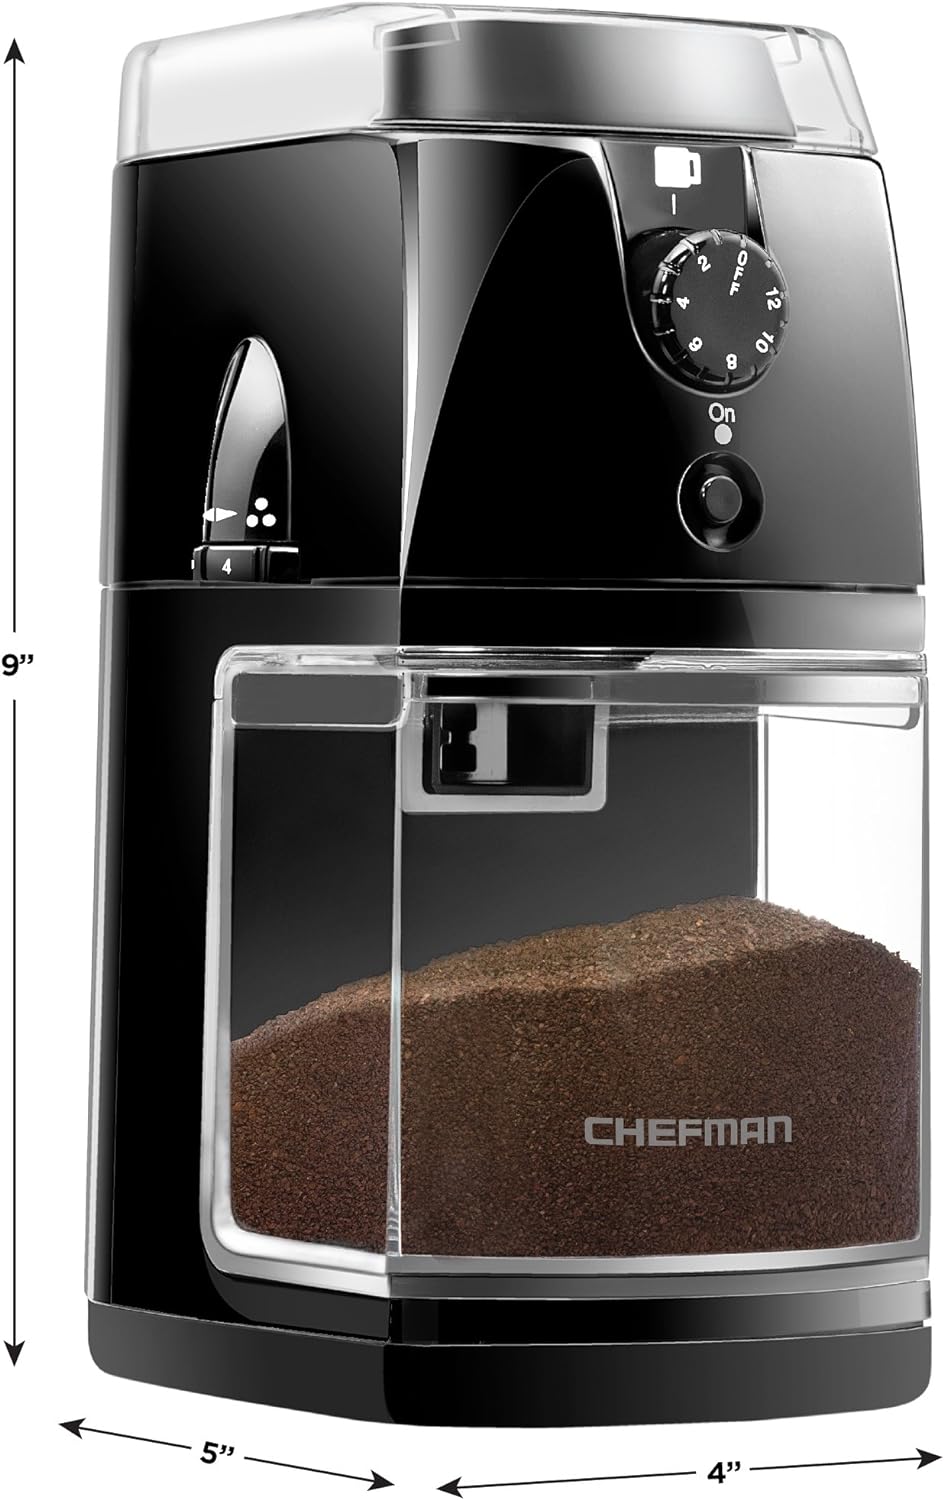 Chefman Conical Burr Coffee Grinder, Create The Boldest  Most Flavorful Grind With 31 Settings From Coarse To Extra Fine, One-Touch Digital Control  9.7-oz Bean Capacity, Black